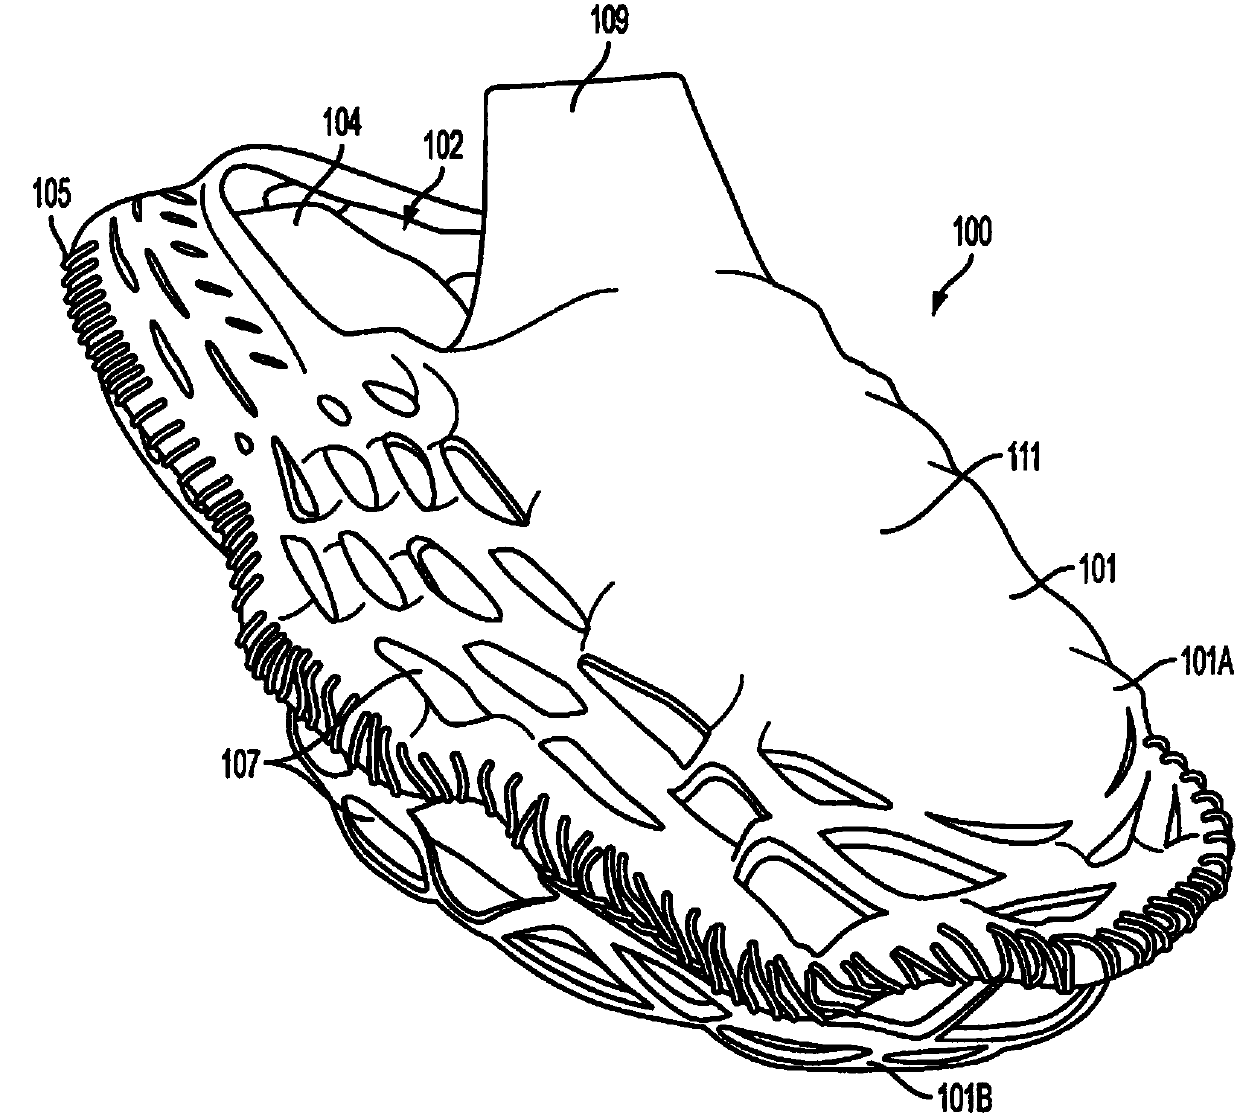 Article of footwear with a collapsible structure